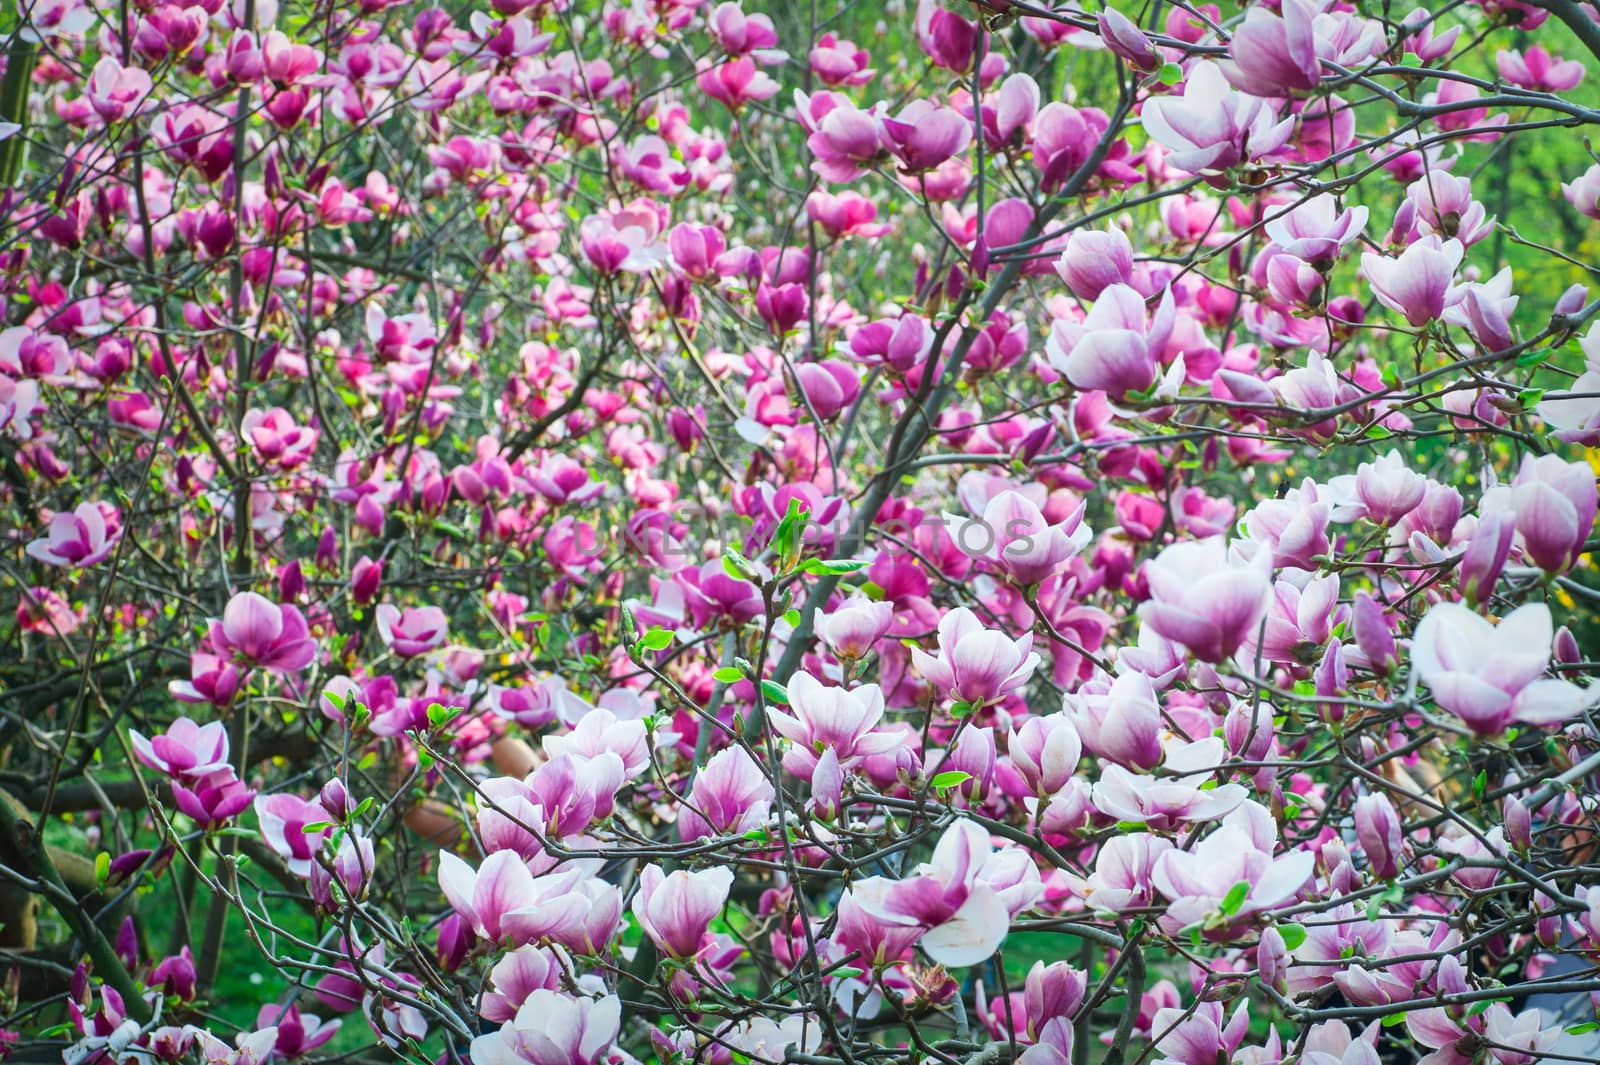 Pink blossoming magnolia trees in the spring garden.